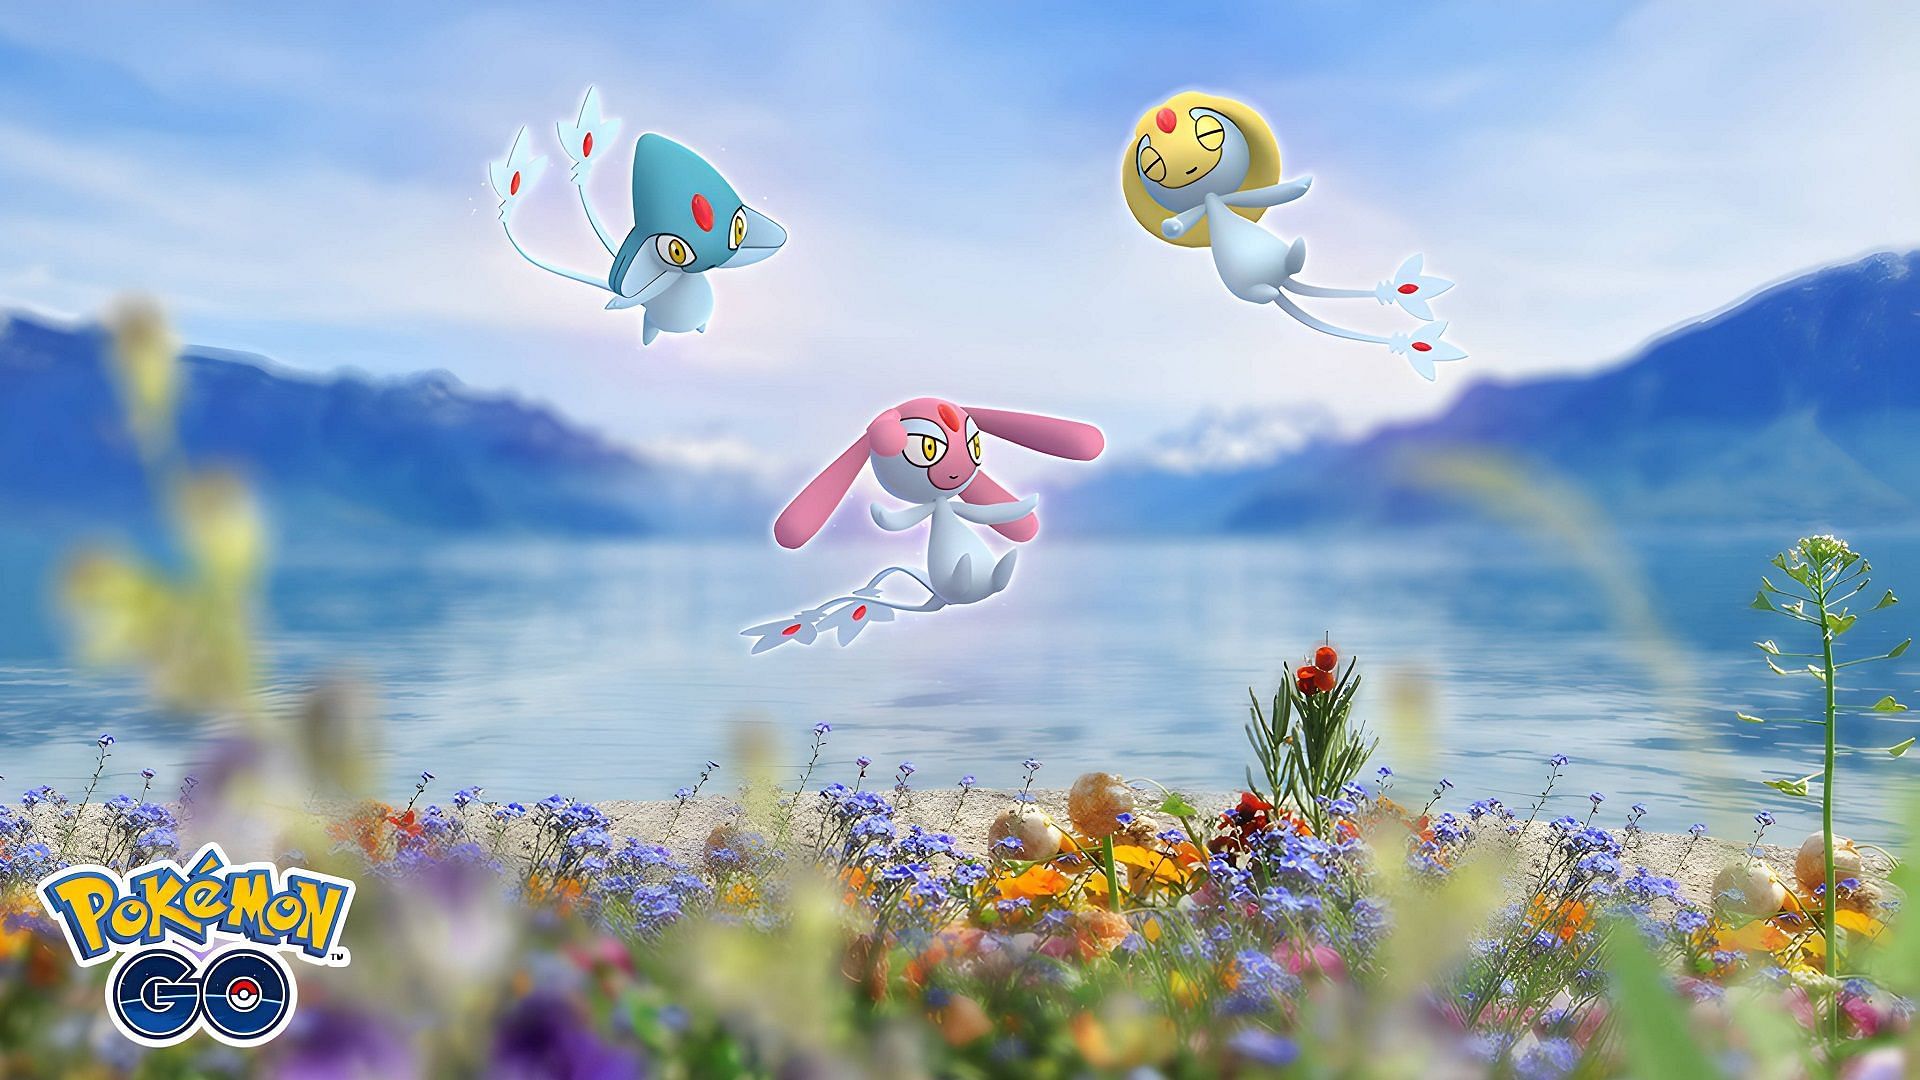 Pokemon GO is bringing back the Lake Guardians once again after their June 11 raid day event (Image via The Pokemon Company)